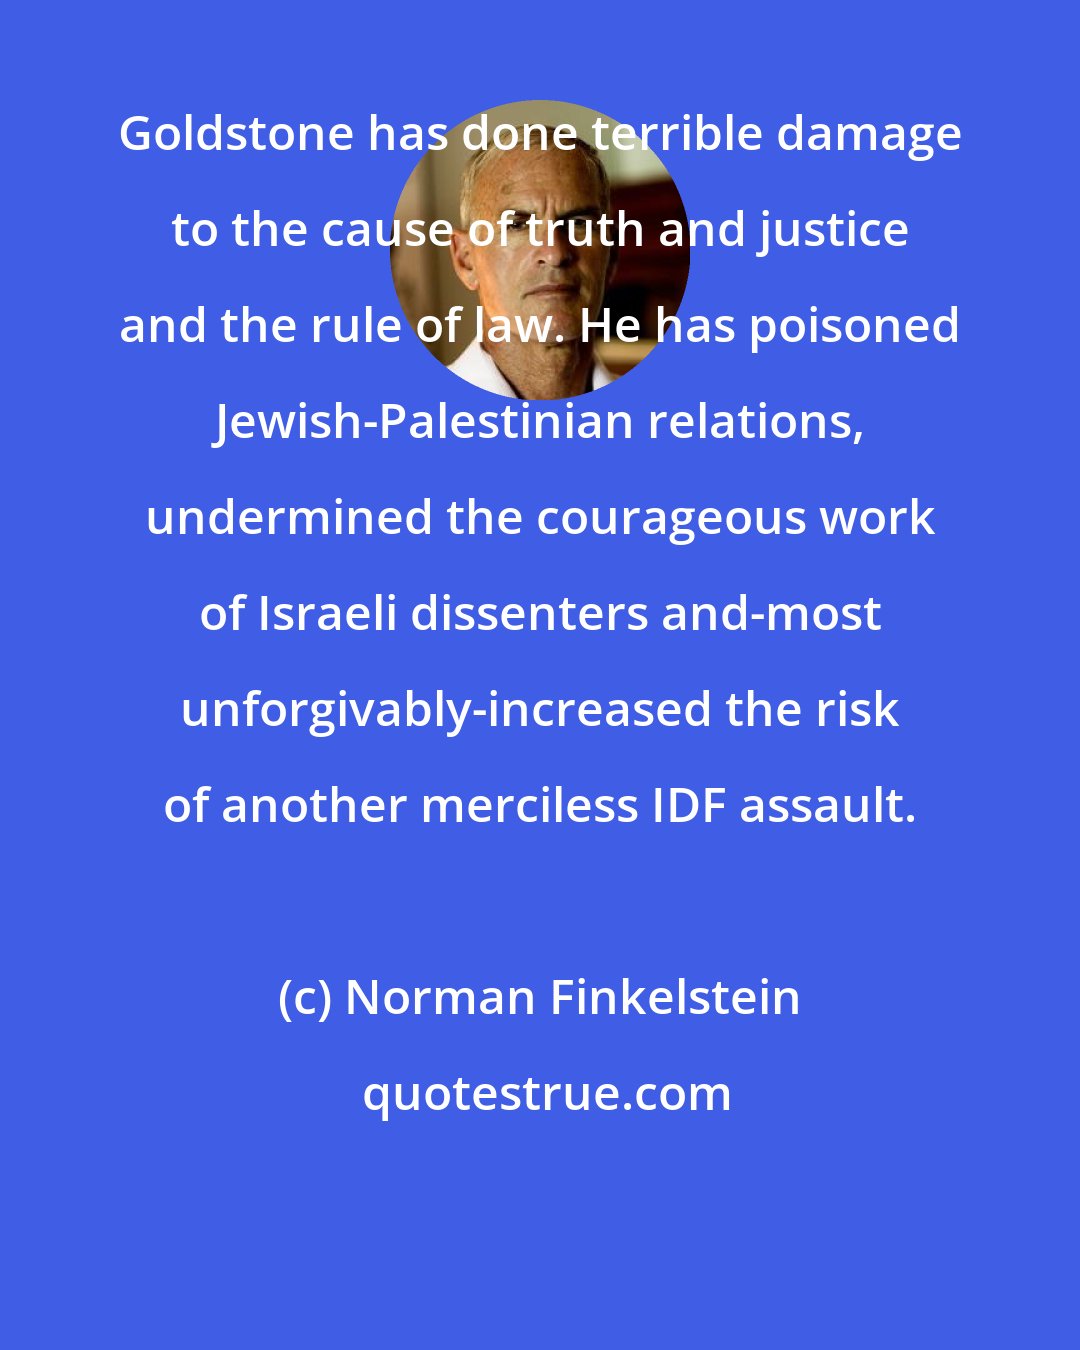 Norman Finkelstein: Goldstone has done terrible damage to the cause of truth and justice and the rule of law. He has poisoned Jewish-Palestinian relations, undermined the courageous work of Israeli dissenters and-most unforgivably-increased the risk of another merciless IDF assault.